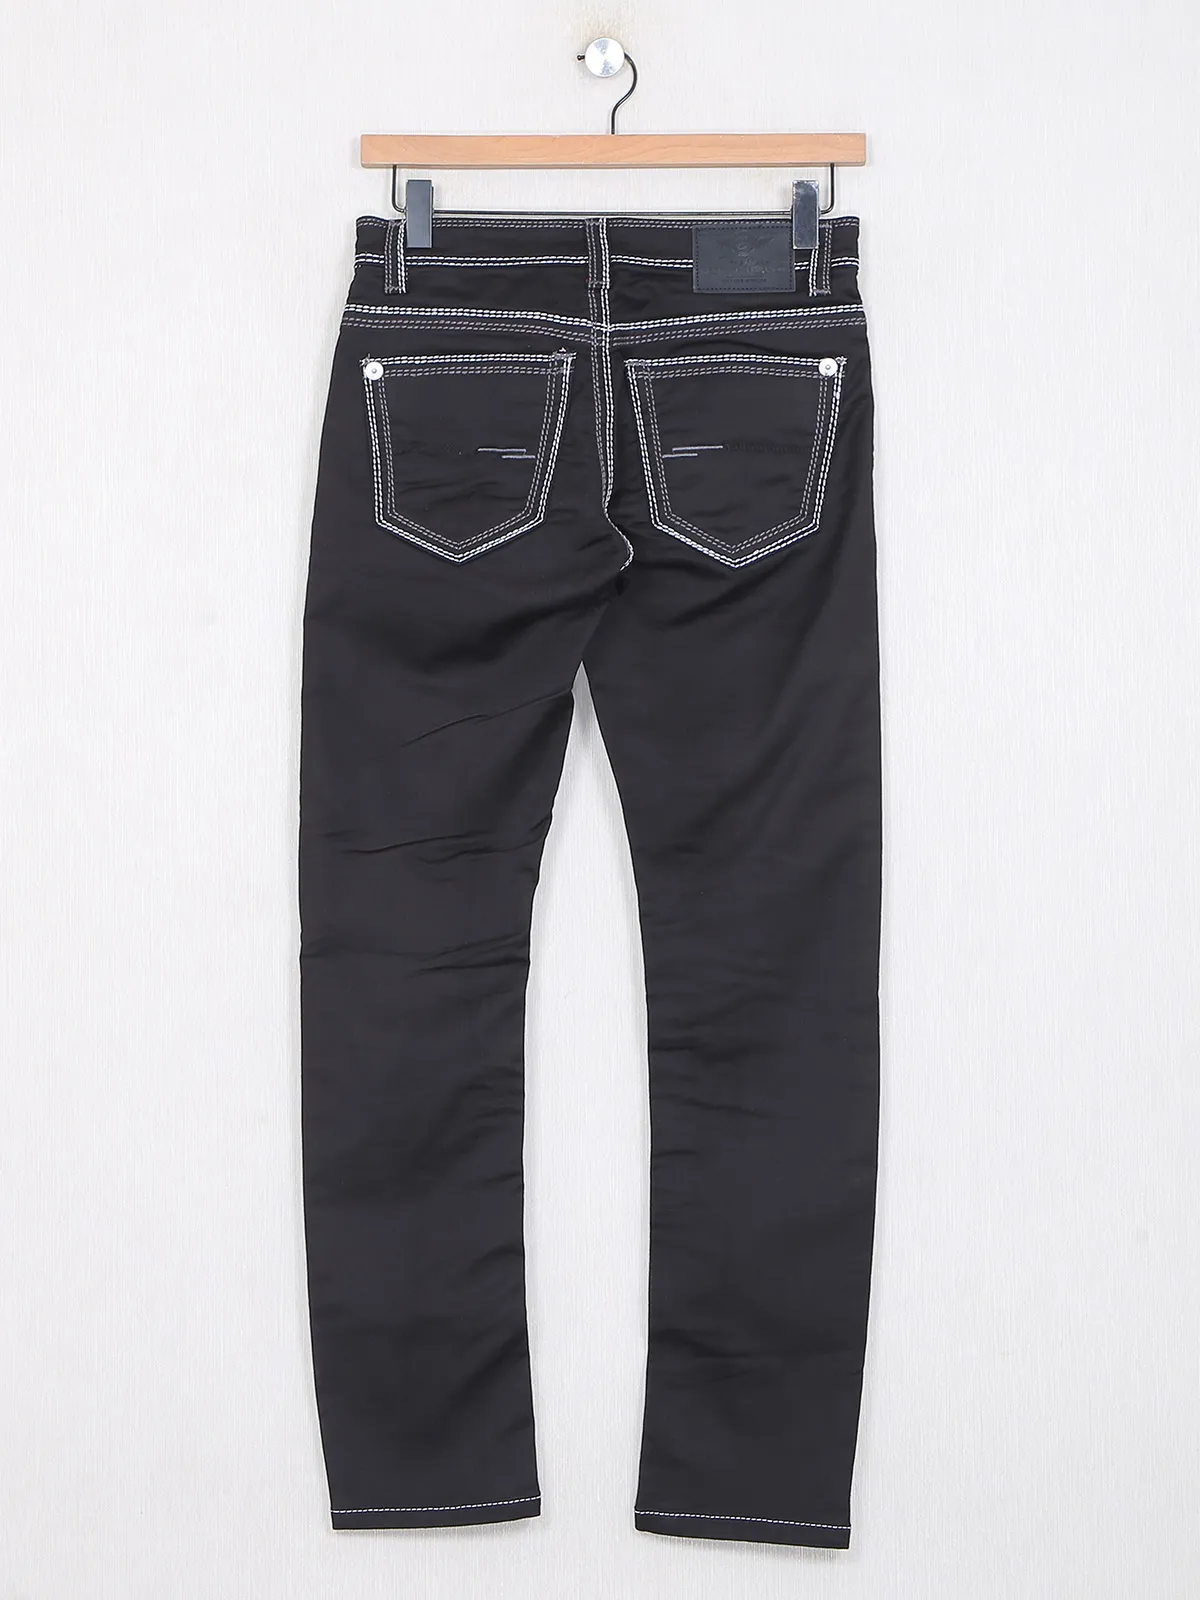 Gesture solid black cotton casual wear jeans